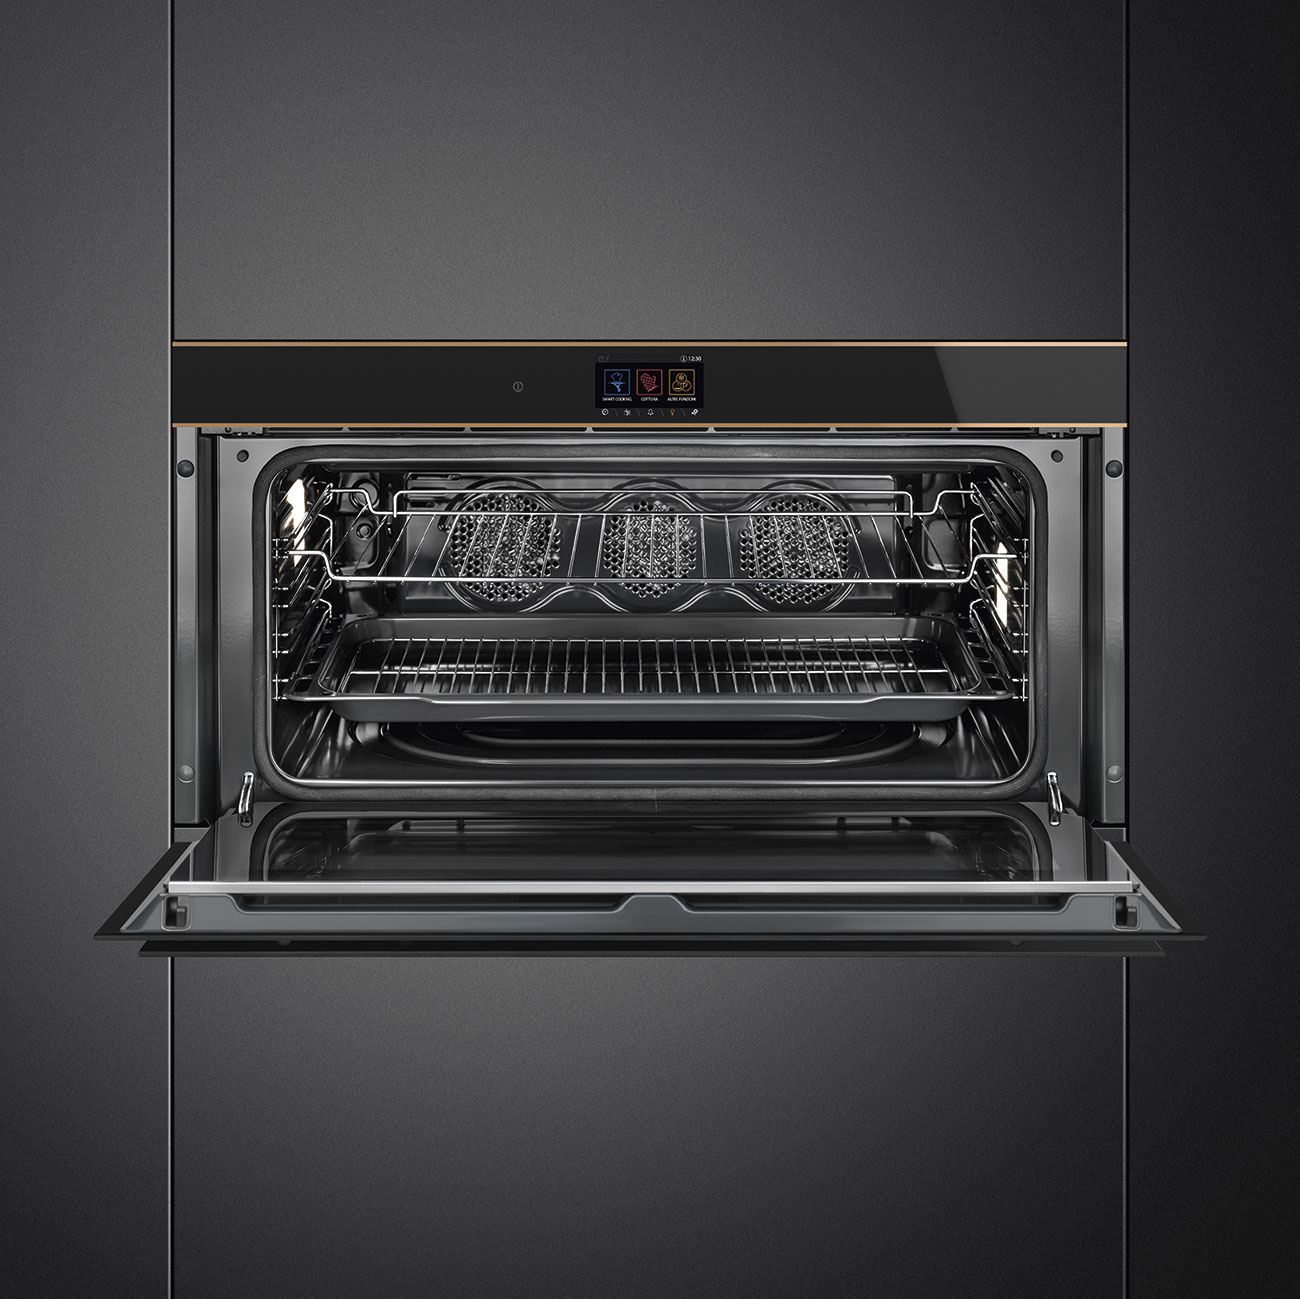 Oven Thermo-ventilated Reduced height 90cm Smeg_3